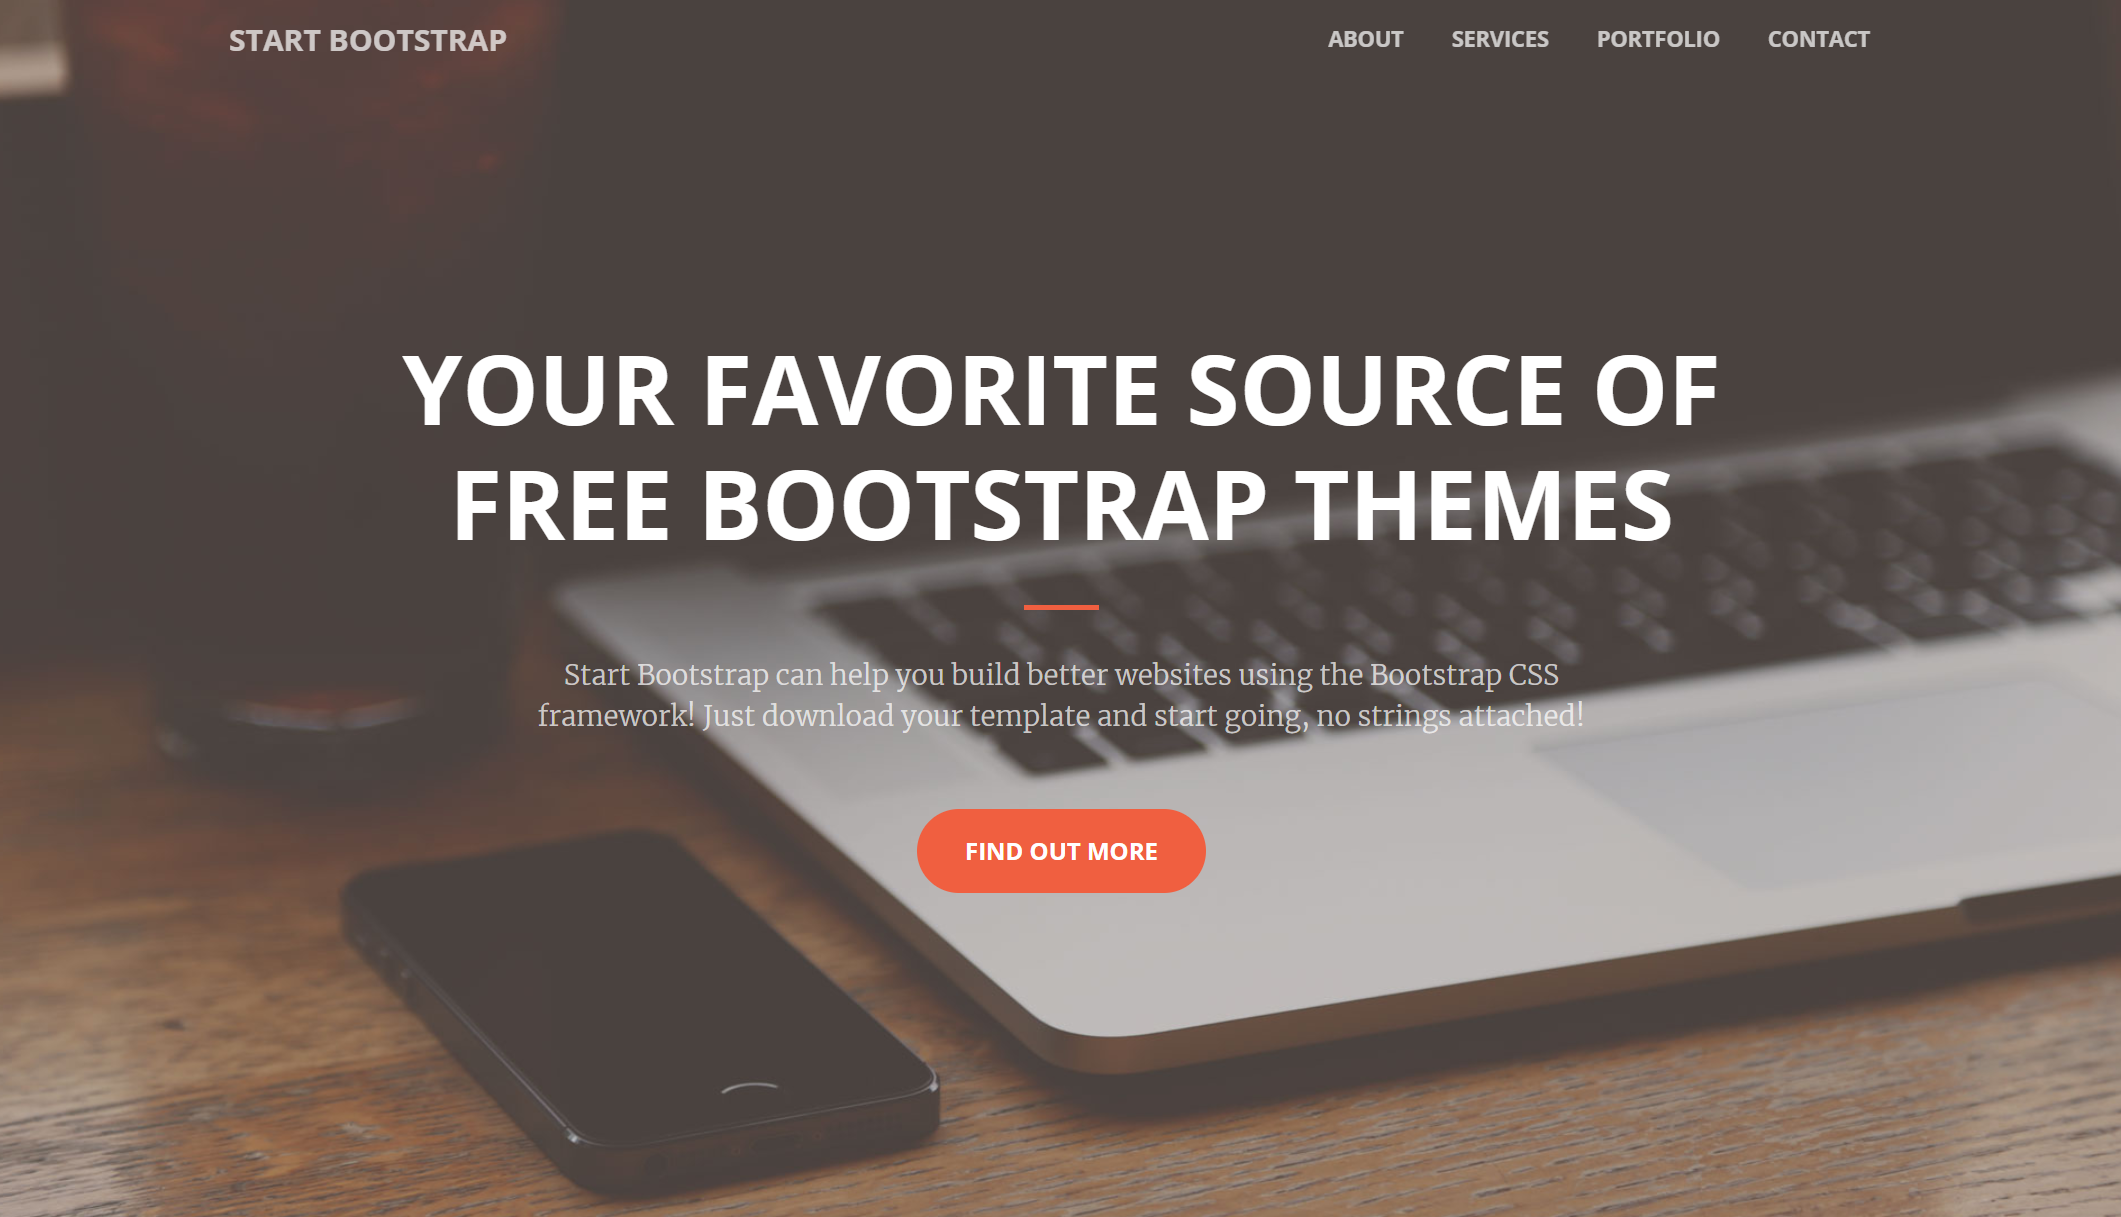 Creative–A Creative Bootstrap Portfolios and Businesses Website Template